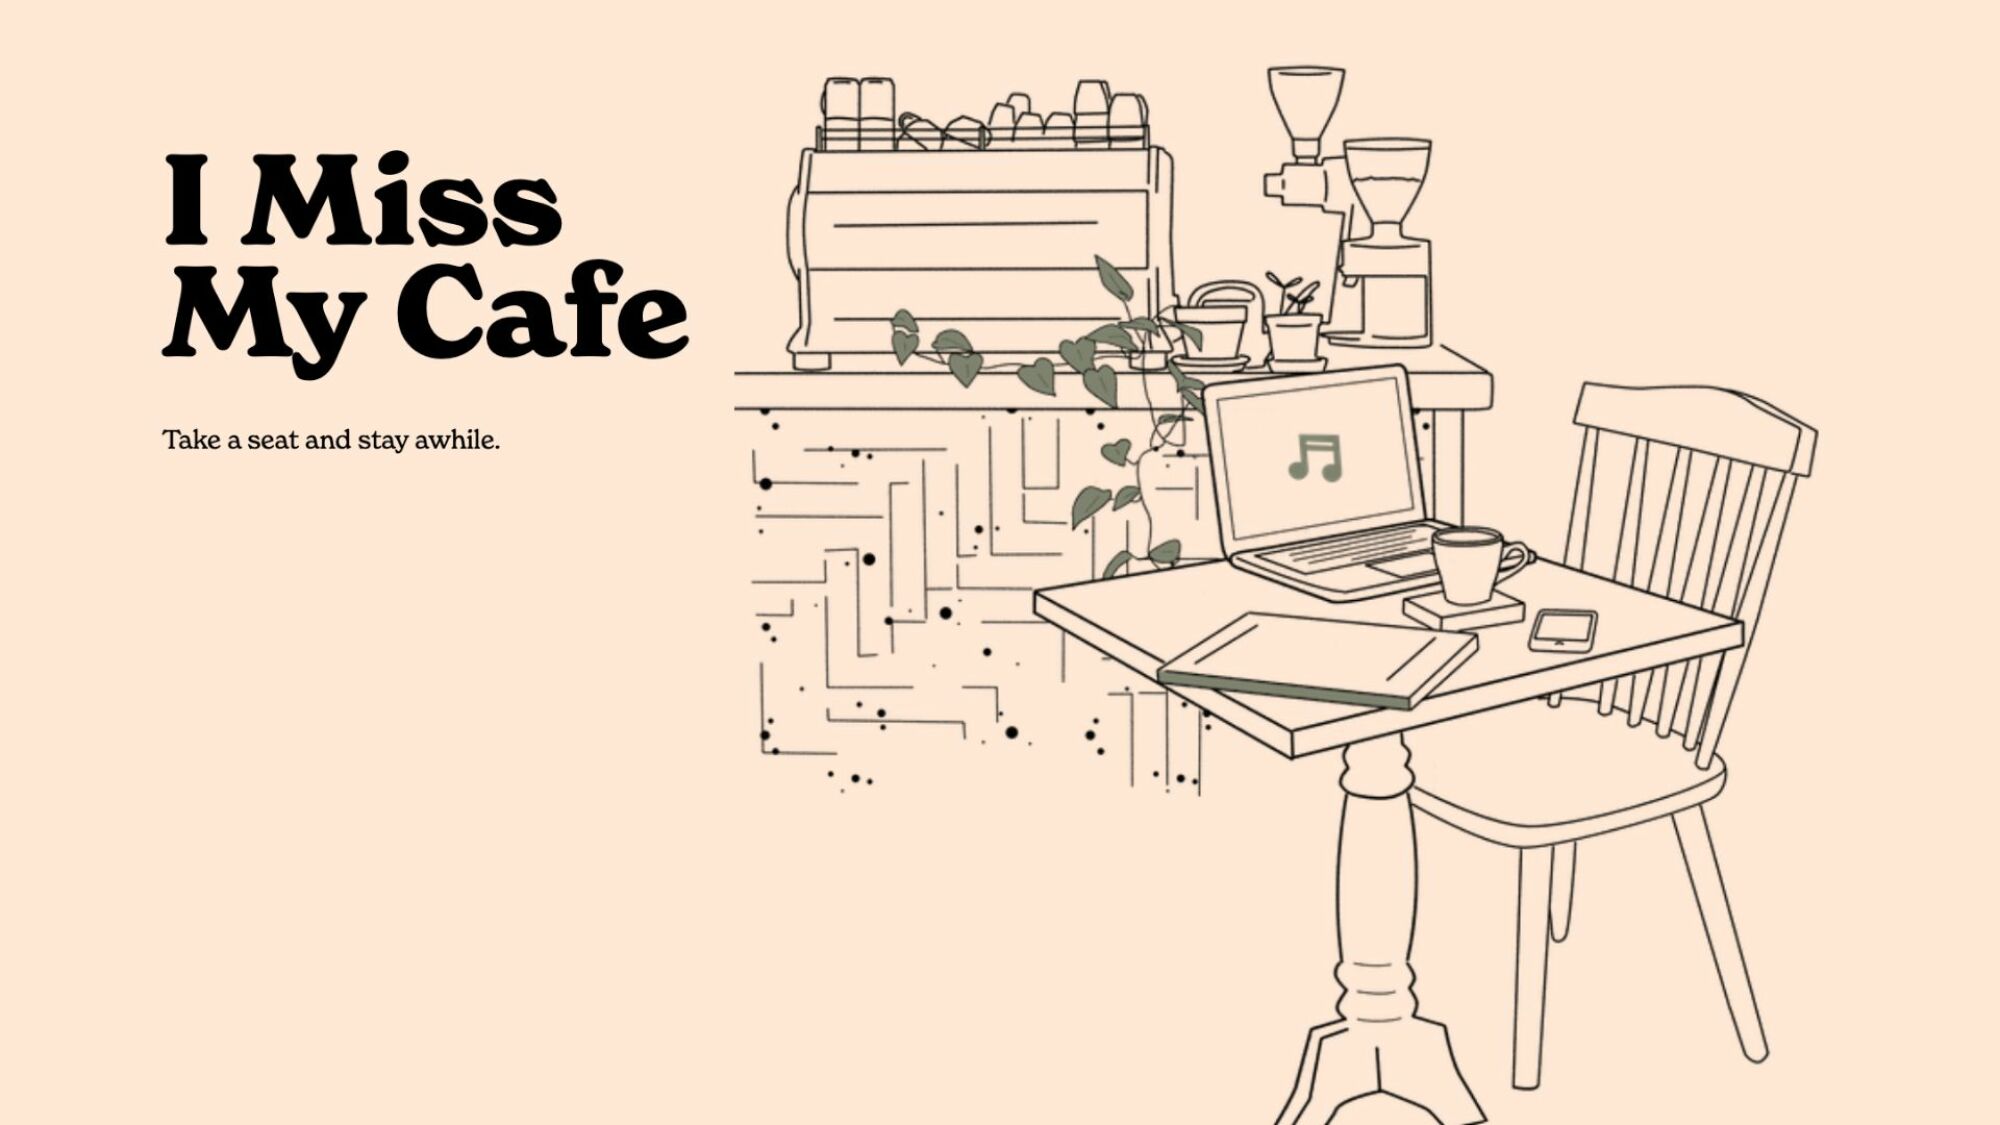 The homepage of IMissMyCafe.com. A line drawing of a table and chair with an open laptop on it. Behind that is a barista bar.